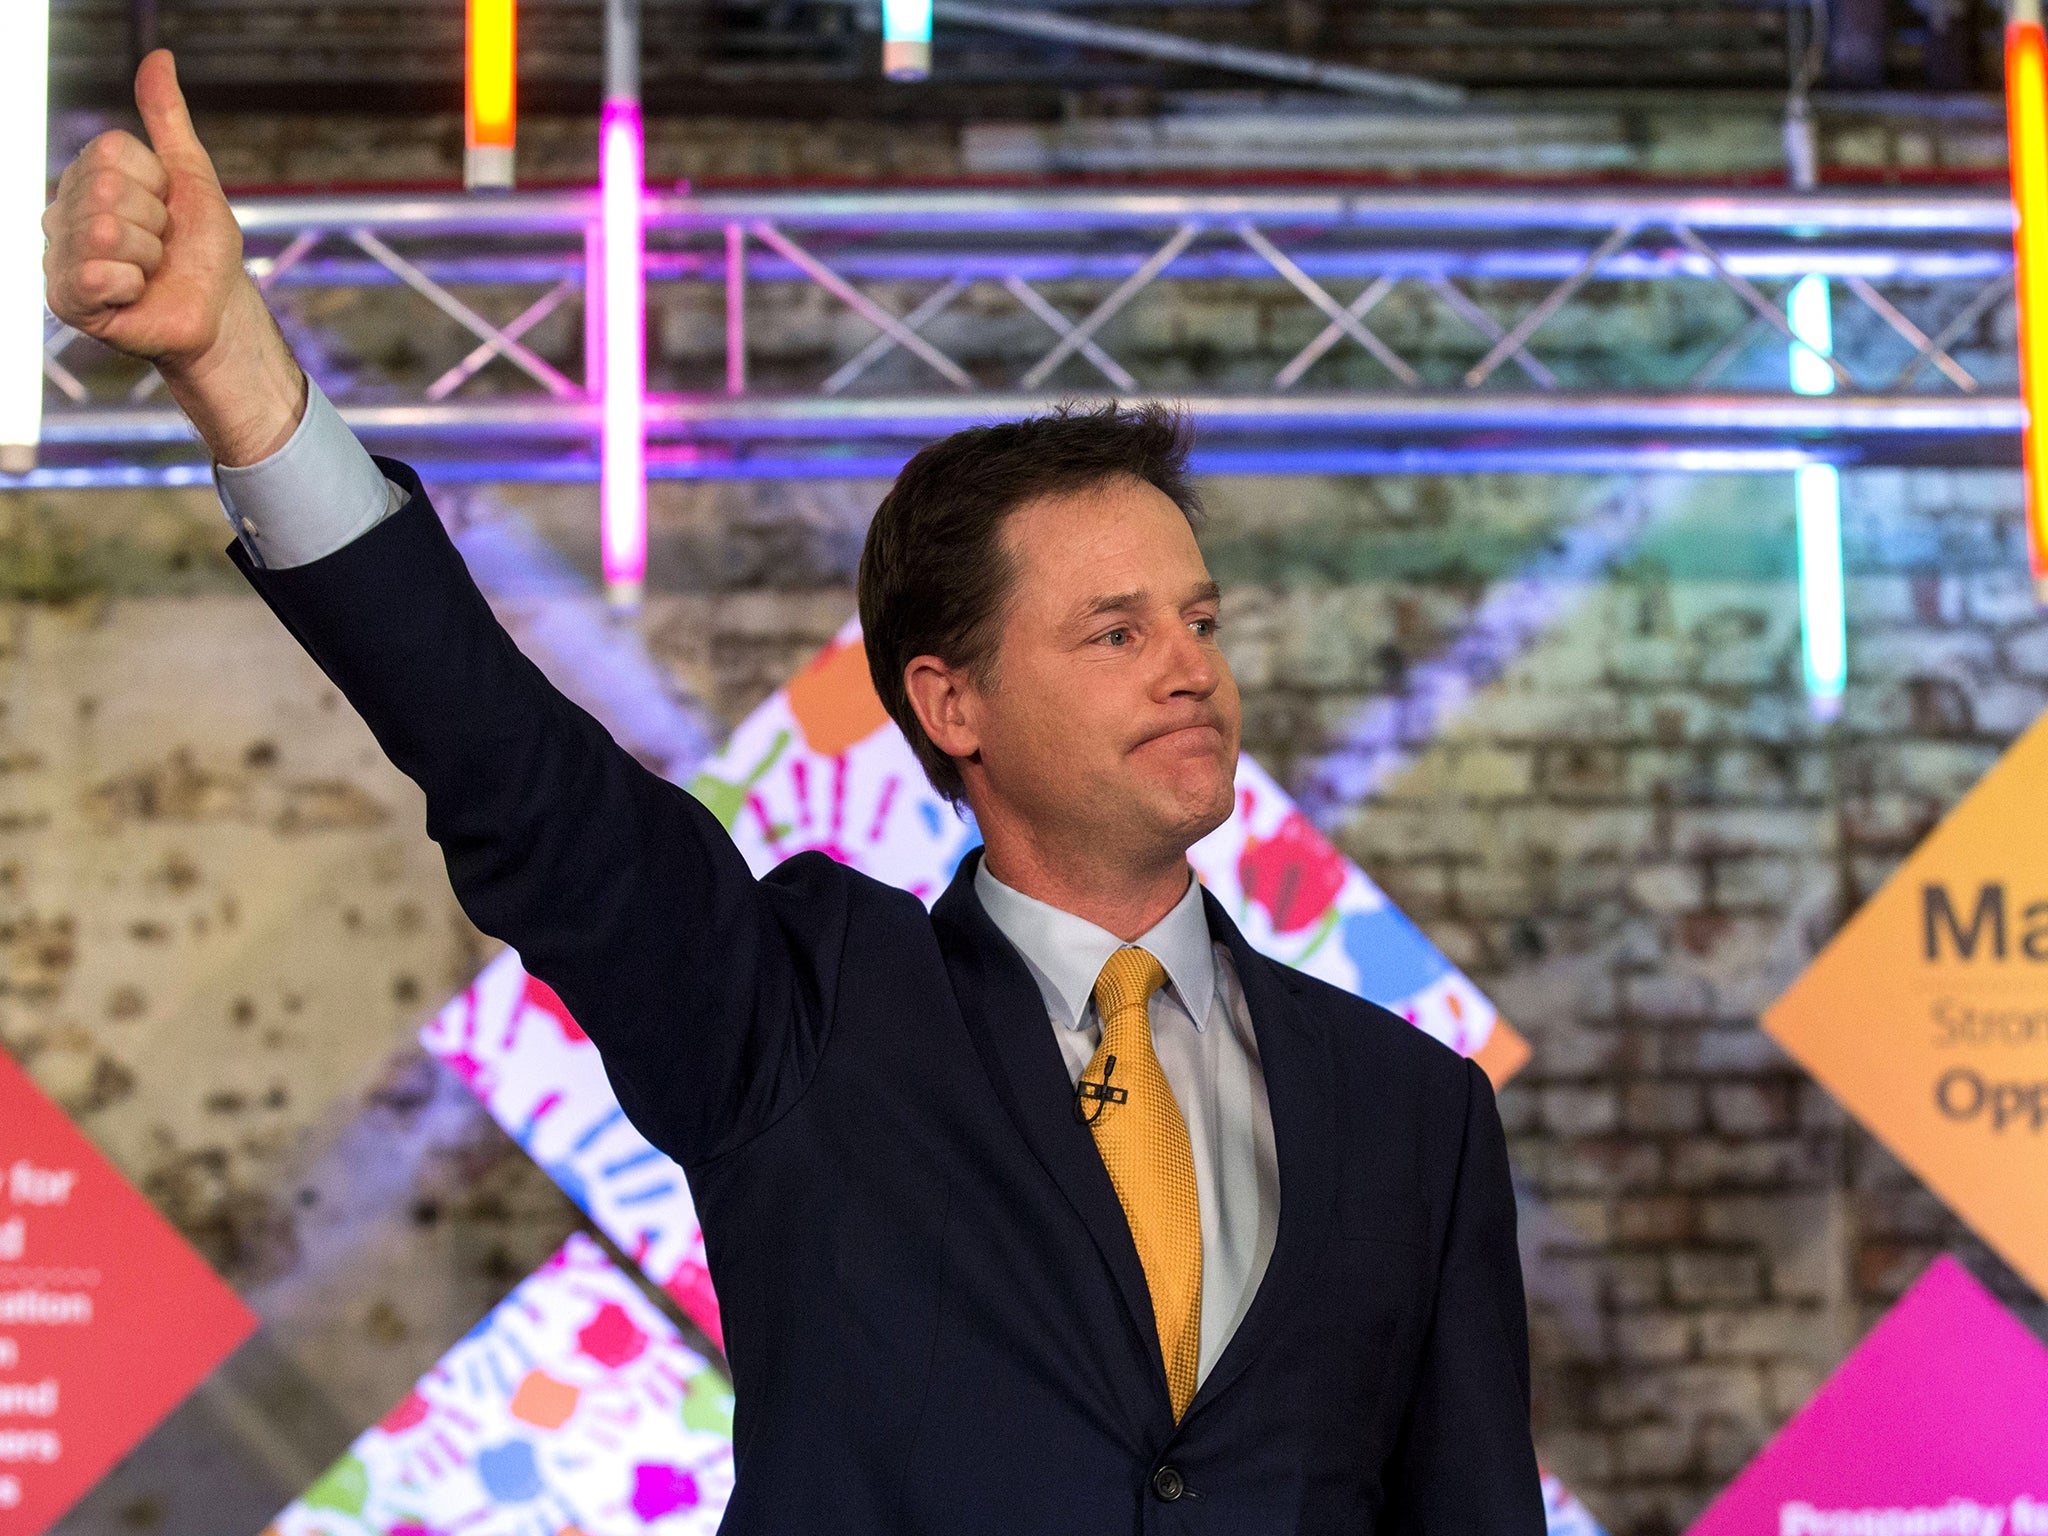 Liberal Democrat leader Nick Clegg speaks at the launch of his party's manifesto